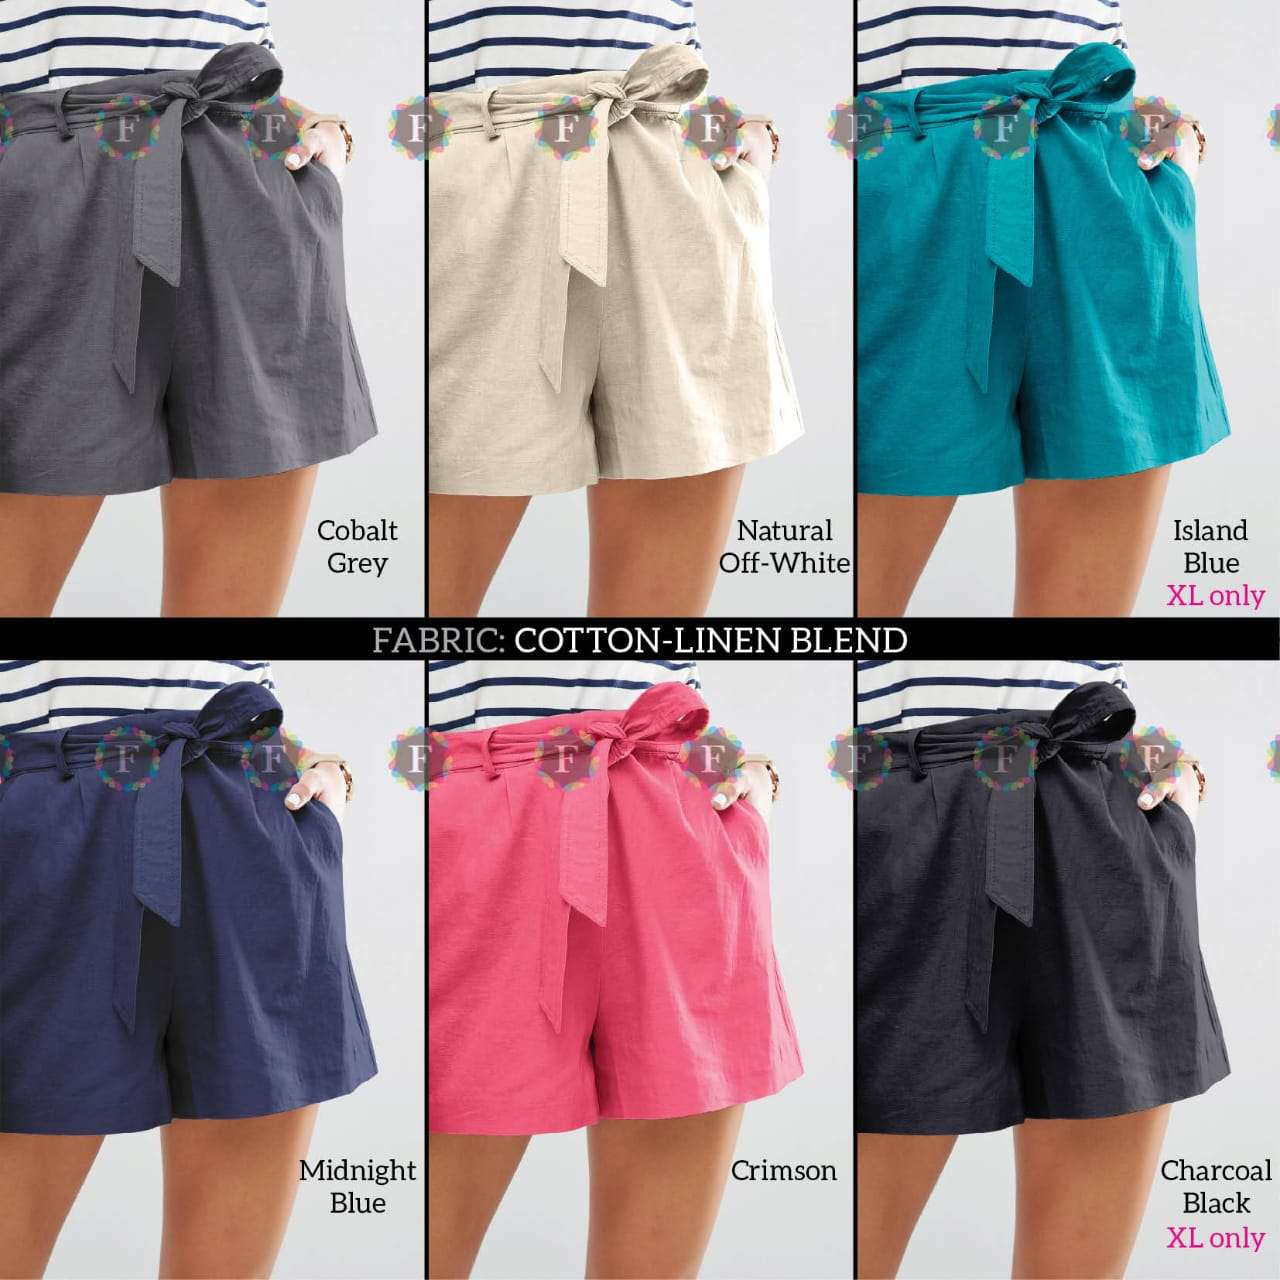 KNOTTED SHORTS BY FIESTA 01 TO 11 SERIES BEAUTIFUL STYLISH FANCY COLORFUL READY TO WEAR & CASUAL WEAR COTTON LINEN SHORTS AT WHOLESALE PRICE